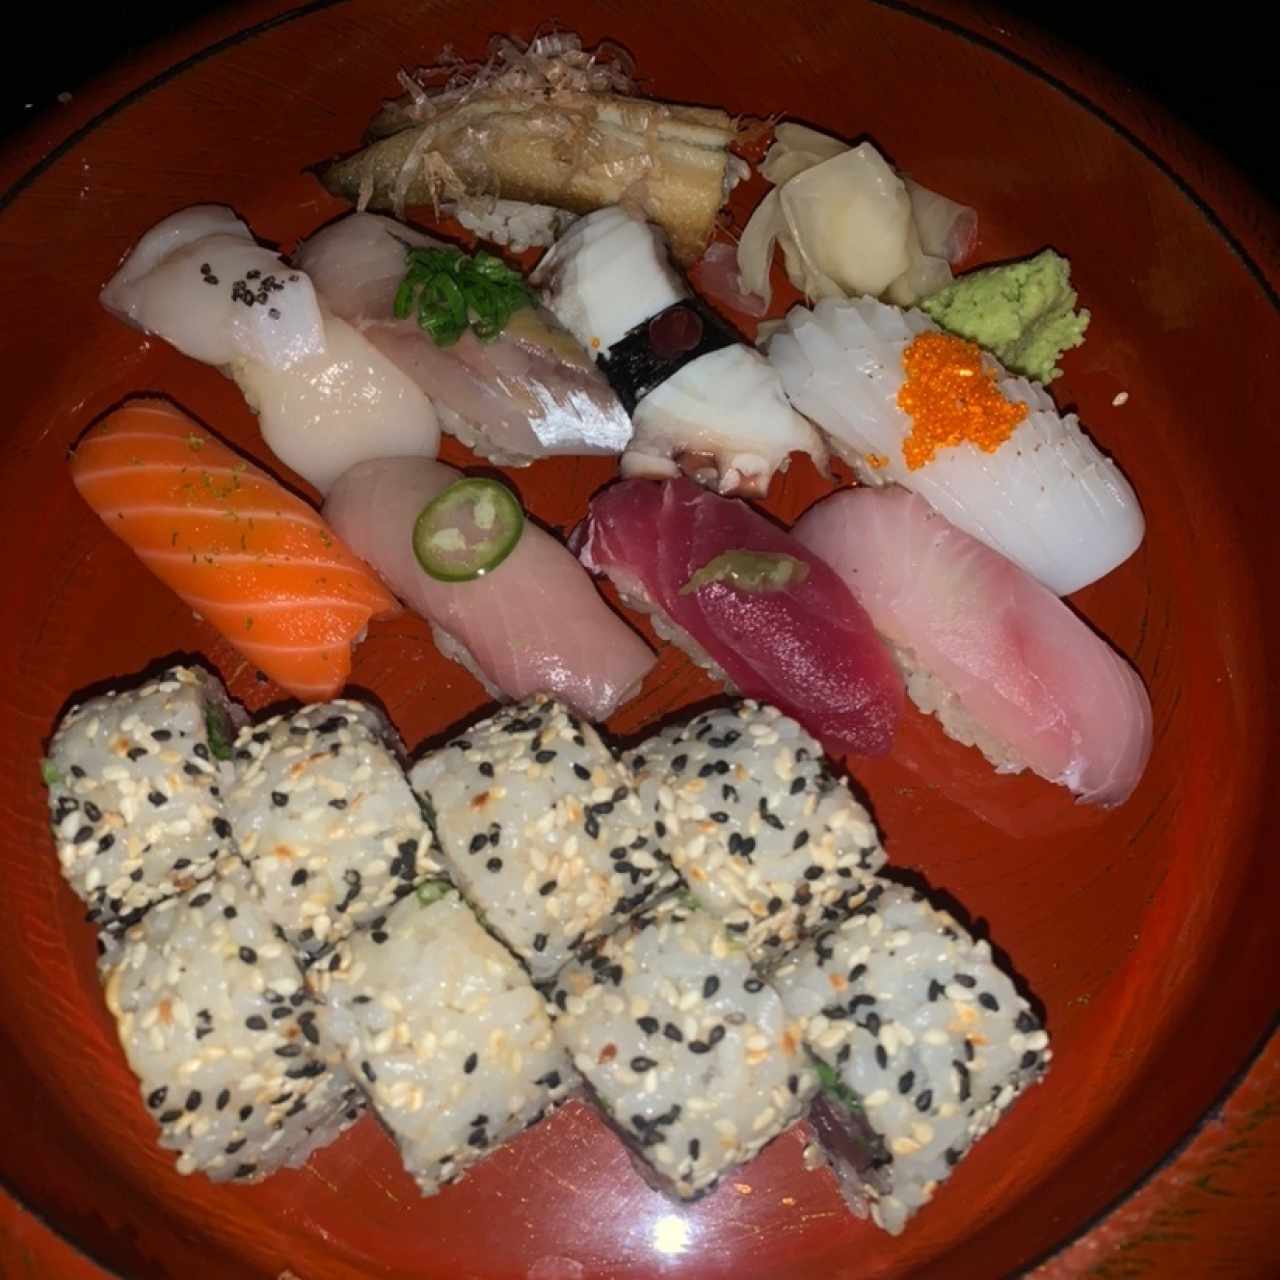 CHEF'S COMBINATIONS - SUSHI SAMPLER